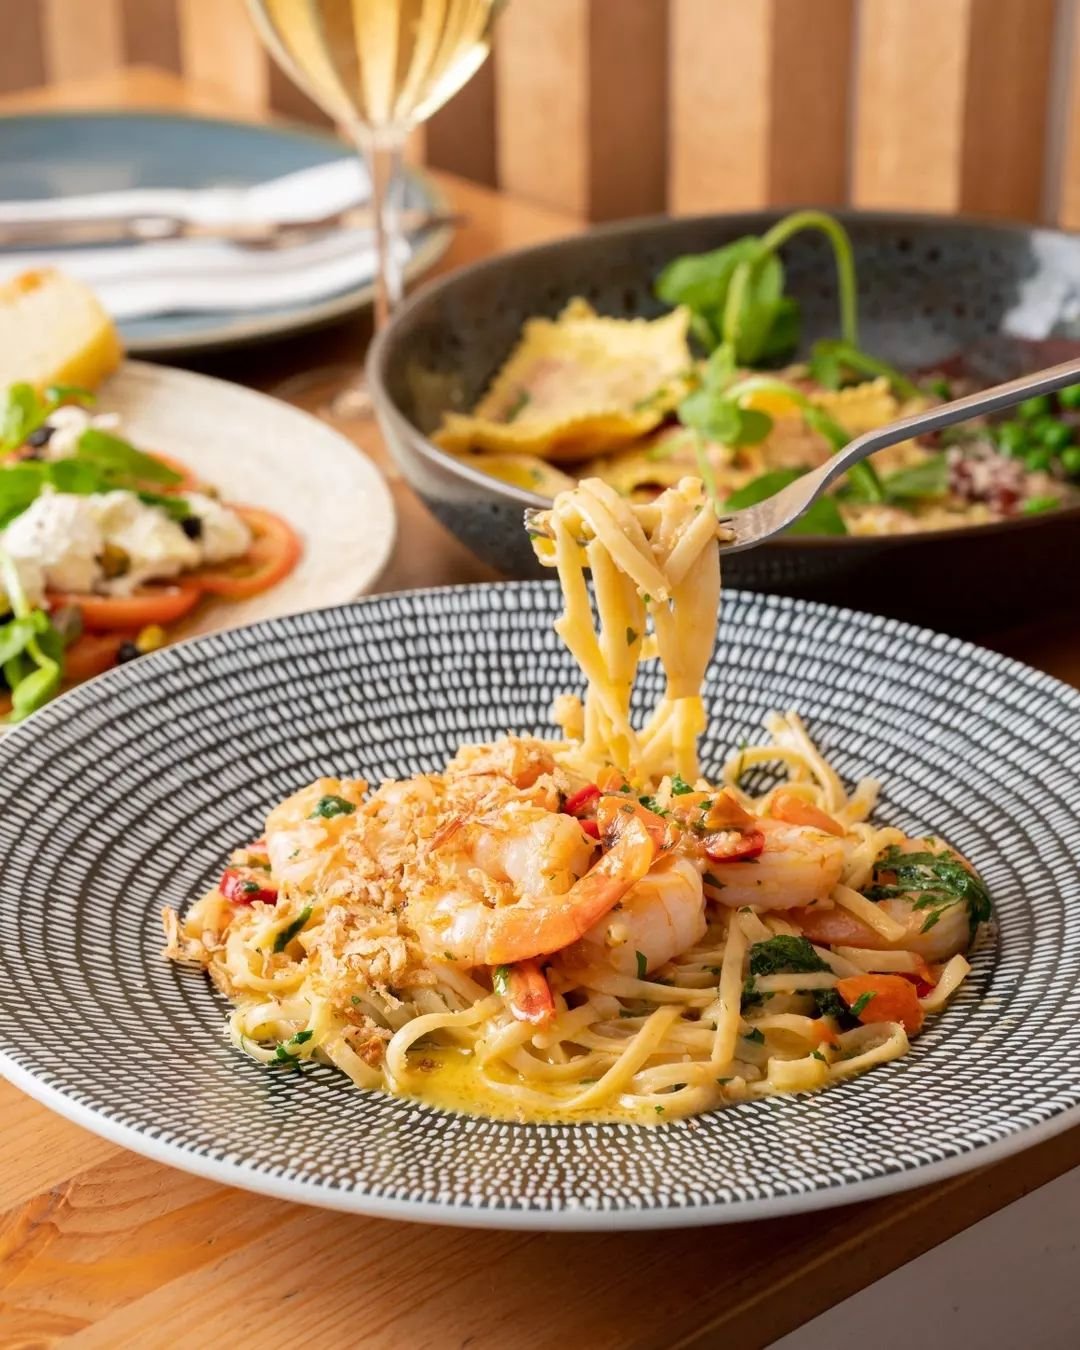 Experience Locals Night dinners with our signature garlic prawn linguine, with tomato, chili, and gremolata&nbsp;🍝 

2 courses for $50 or 3 courses for $64 on Tuesdays and Wednesdays!